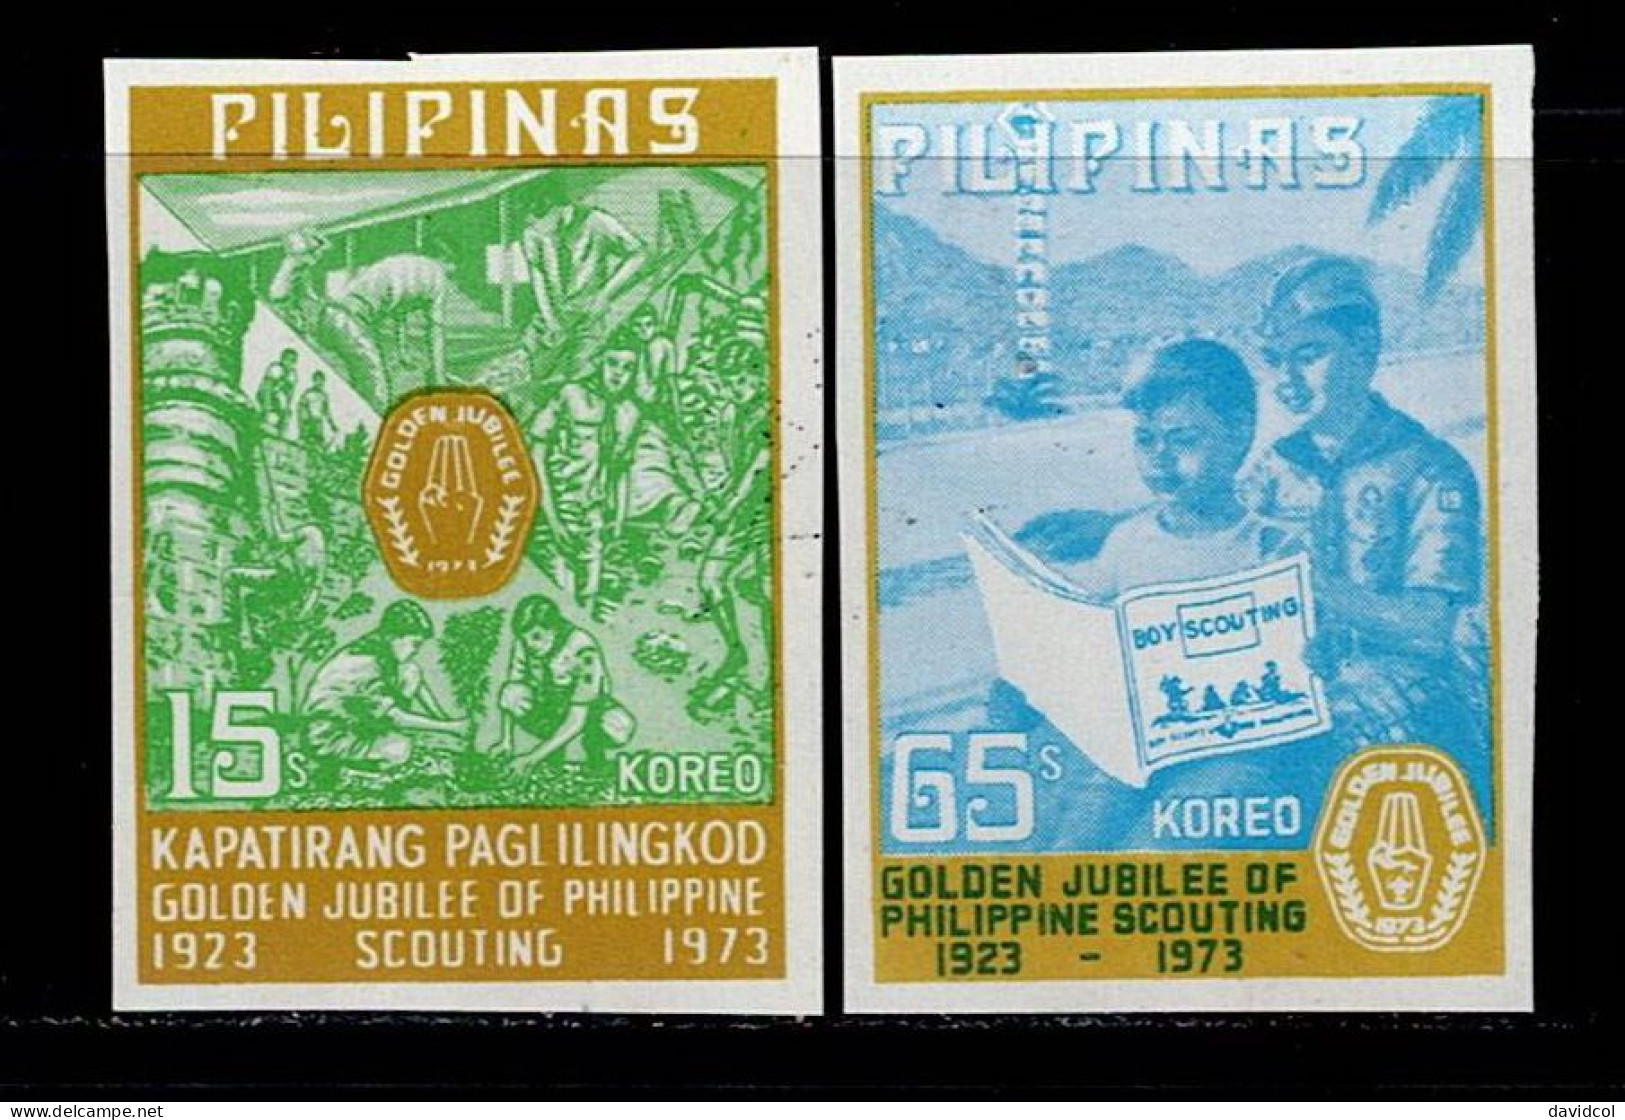 FIL-05- PHILIPPINES - 1973 - MNH -SCOUTS- IMPERFORATE- GOLDEN JUBILEE OF PHILIPPINE SCOUTING - Philippines